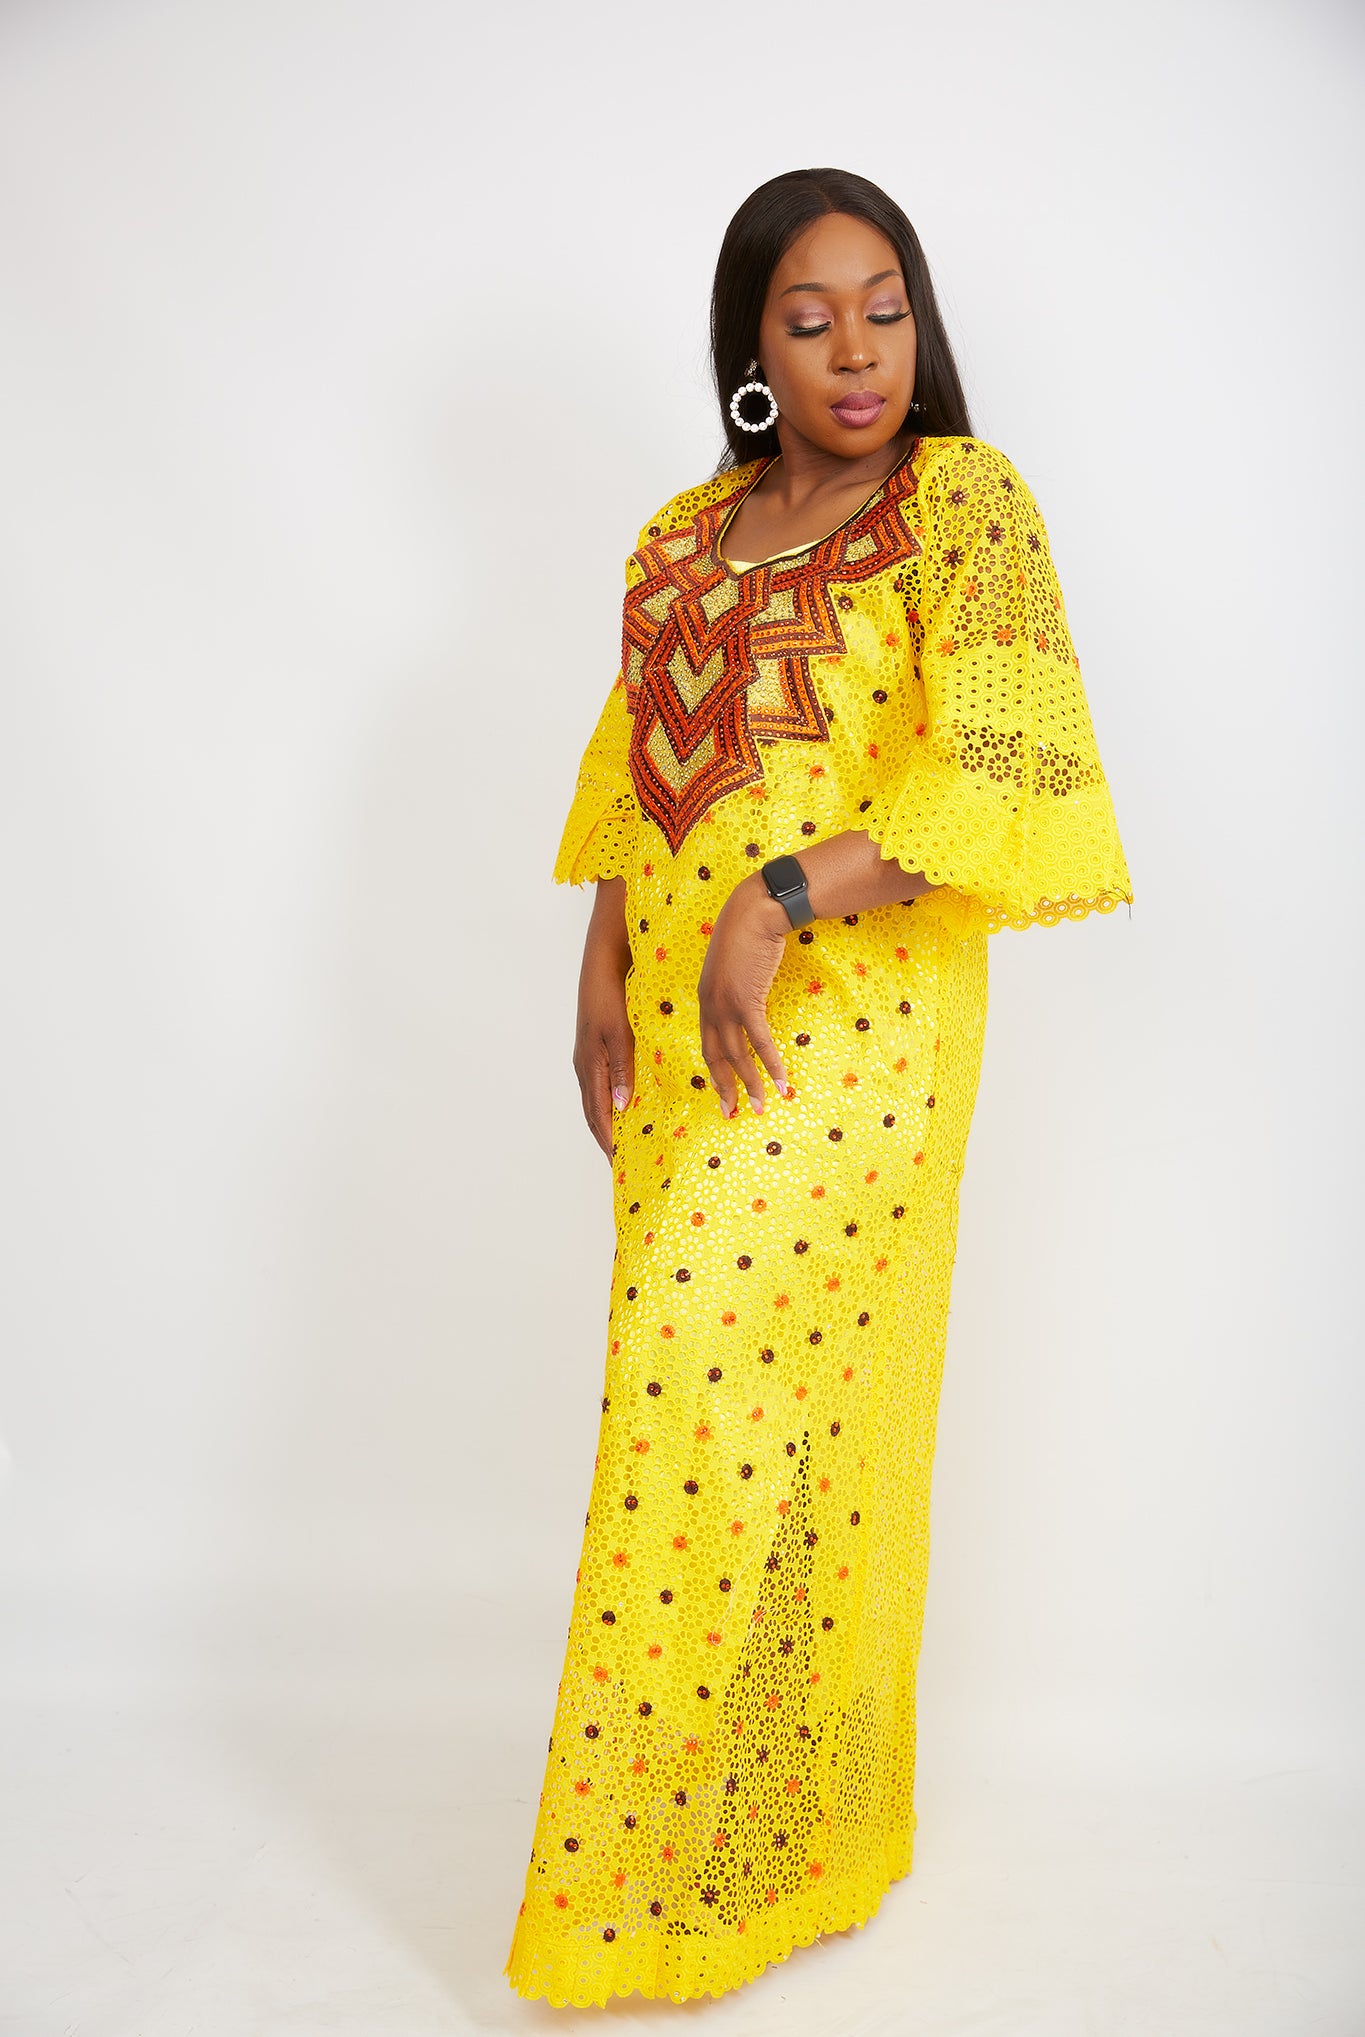 African print clothing UK | African print apparel | African Print clothing online | Trendy African clothing store | Buy African dress